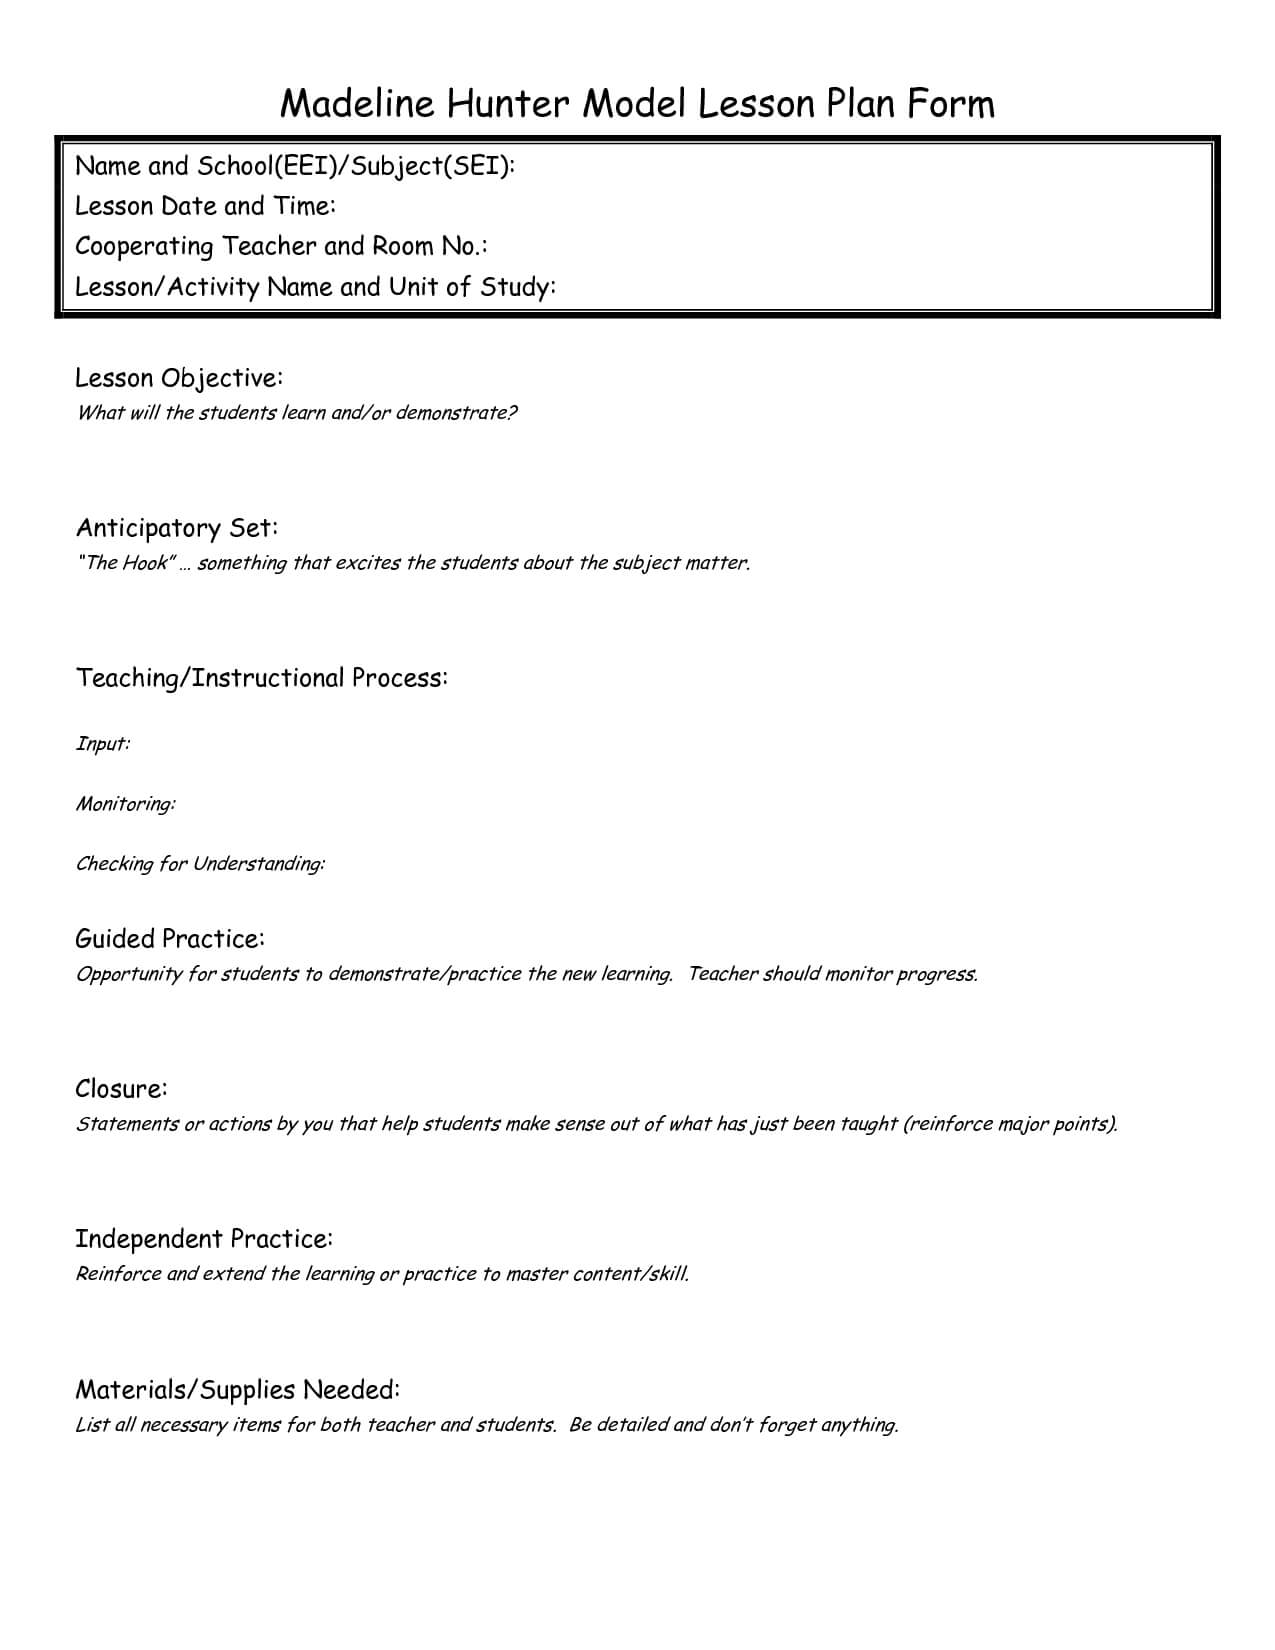 Madeline Hunter Lesson Plan Format Template - Google Search For Madeline Hunter Lesson Plan Blank Template